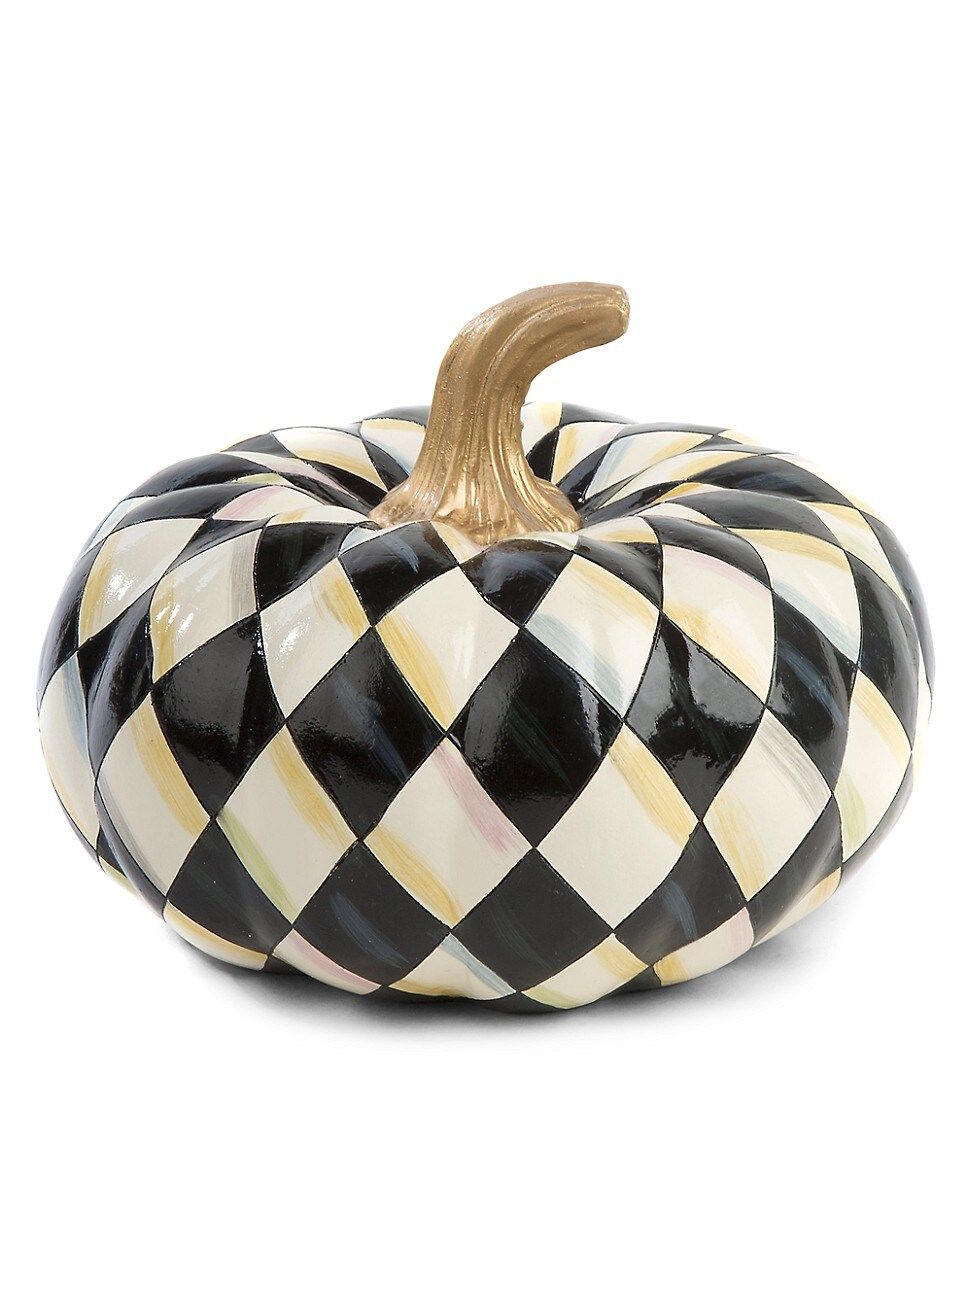 MacKenzie-Childs Courtly Harlequin Squashed Pumpkin | Saks Fifth Avenue